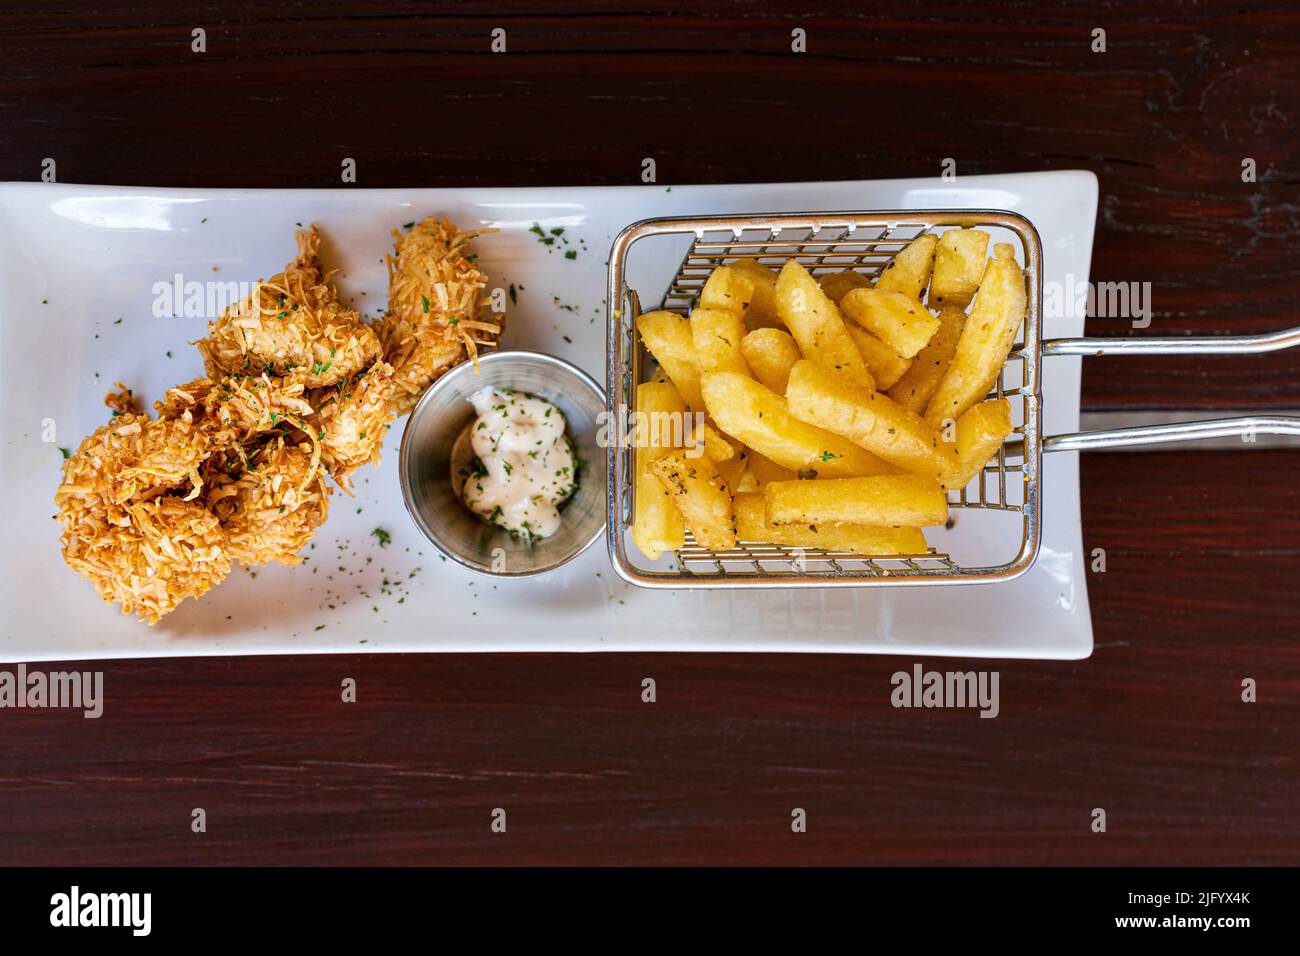 Overhead view of crunchy fried coconut prawns with french fries in a tray, Antigua, Leeward Islands, West Indies, Caribbean, Central America Stock Photo